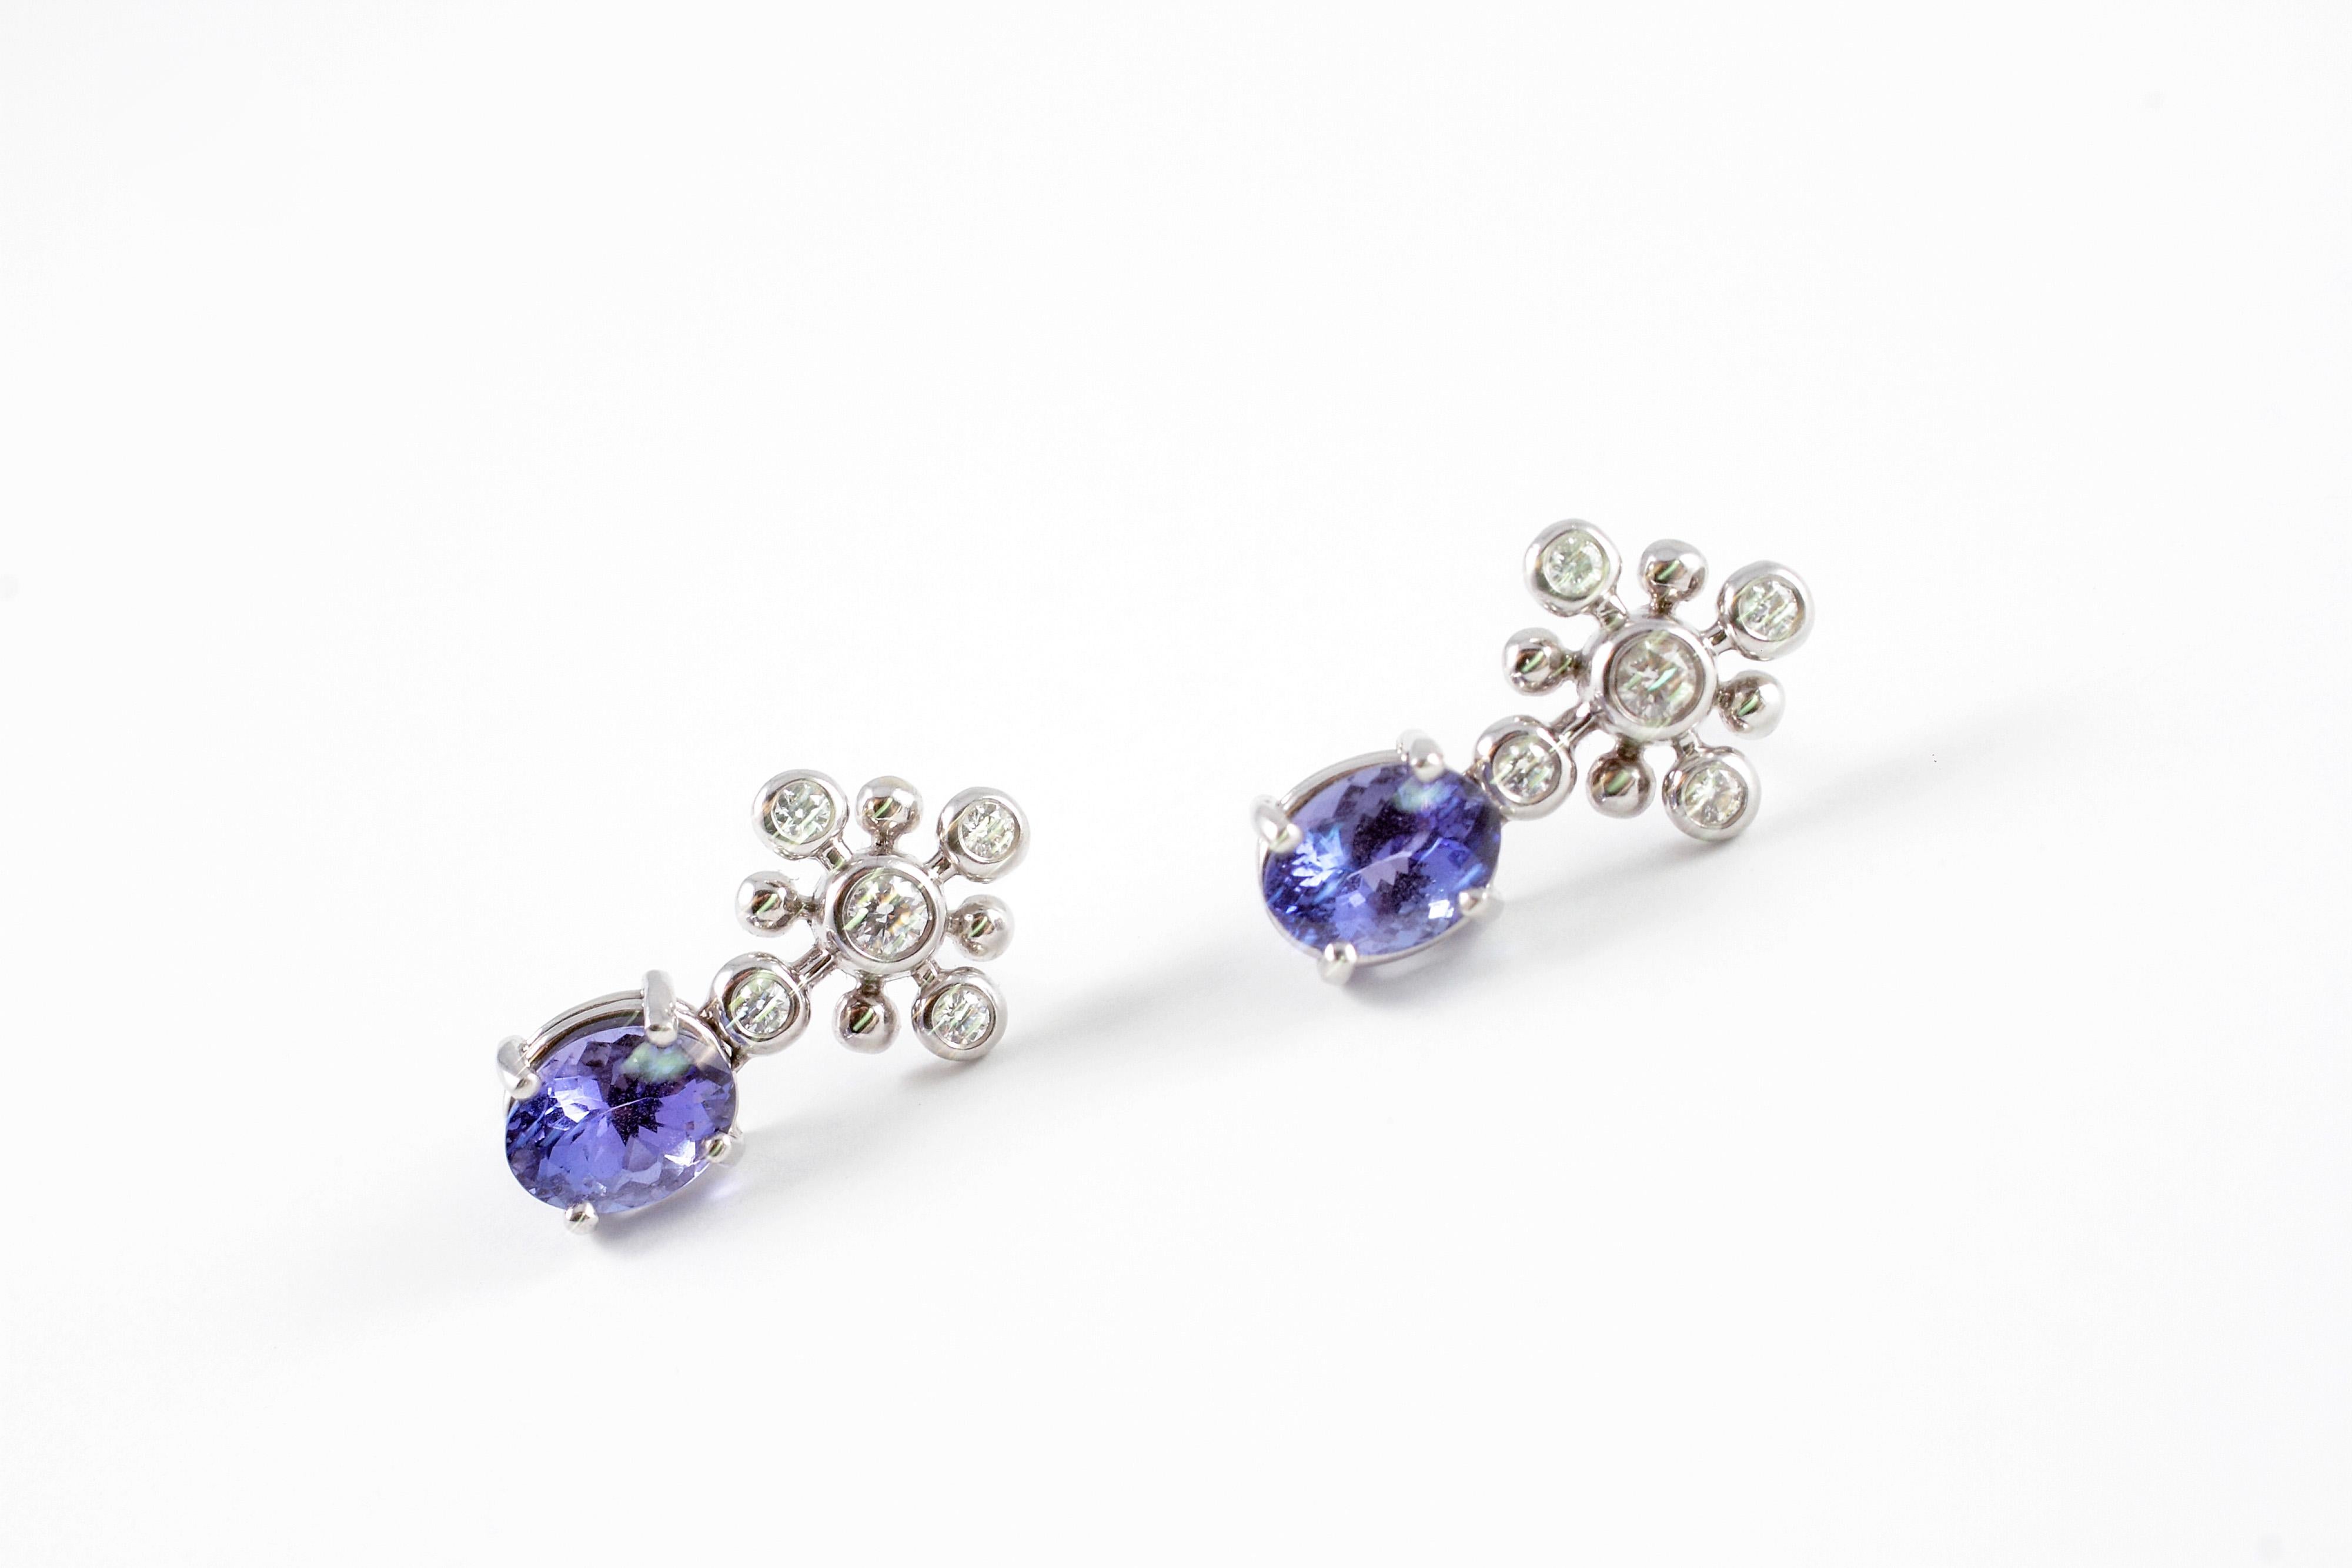 One pair of Tiffany & Co. Tanzanite and Diamond earrings from the 